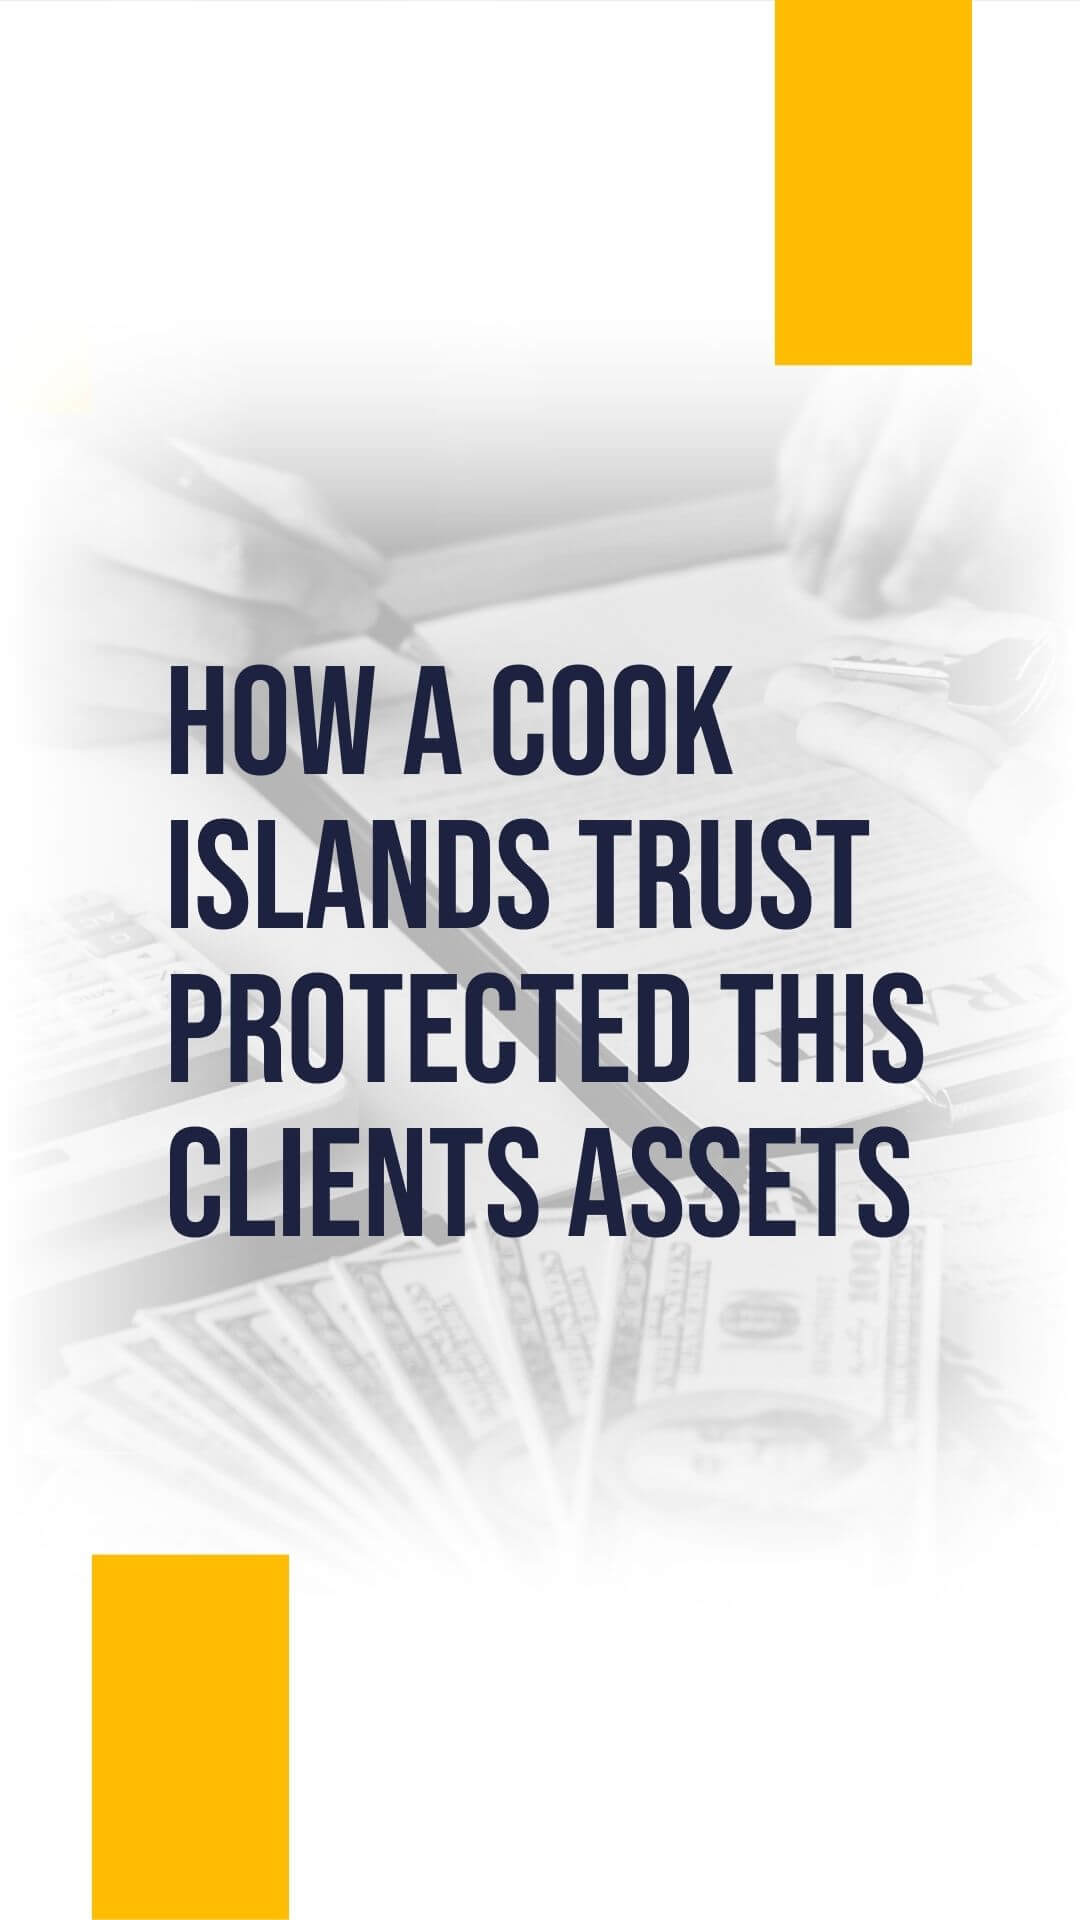 How a Cook Island trust protected client assets